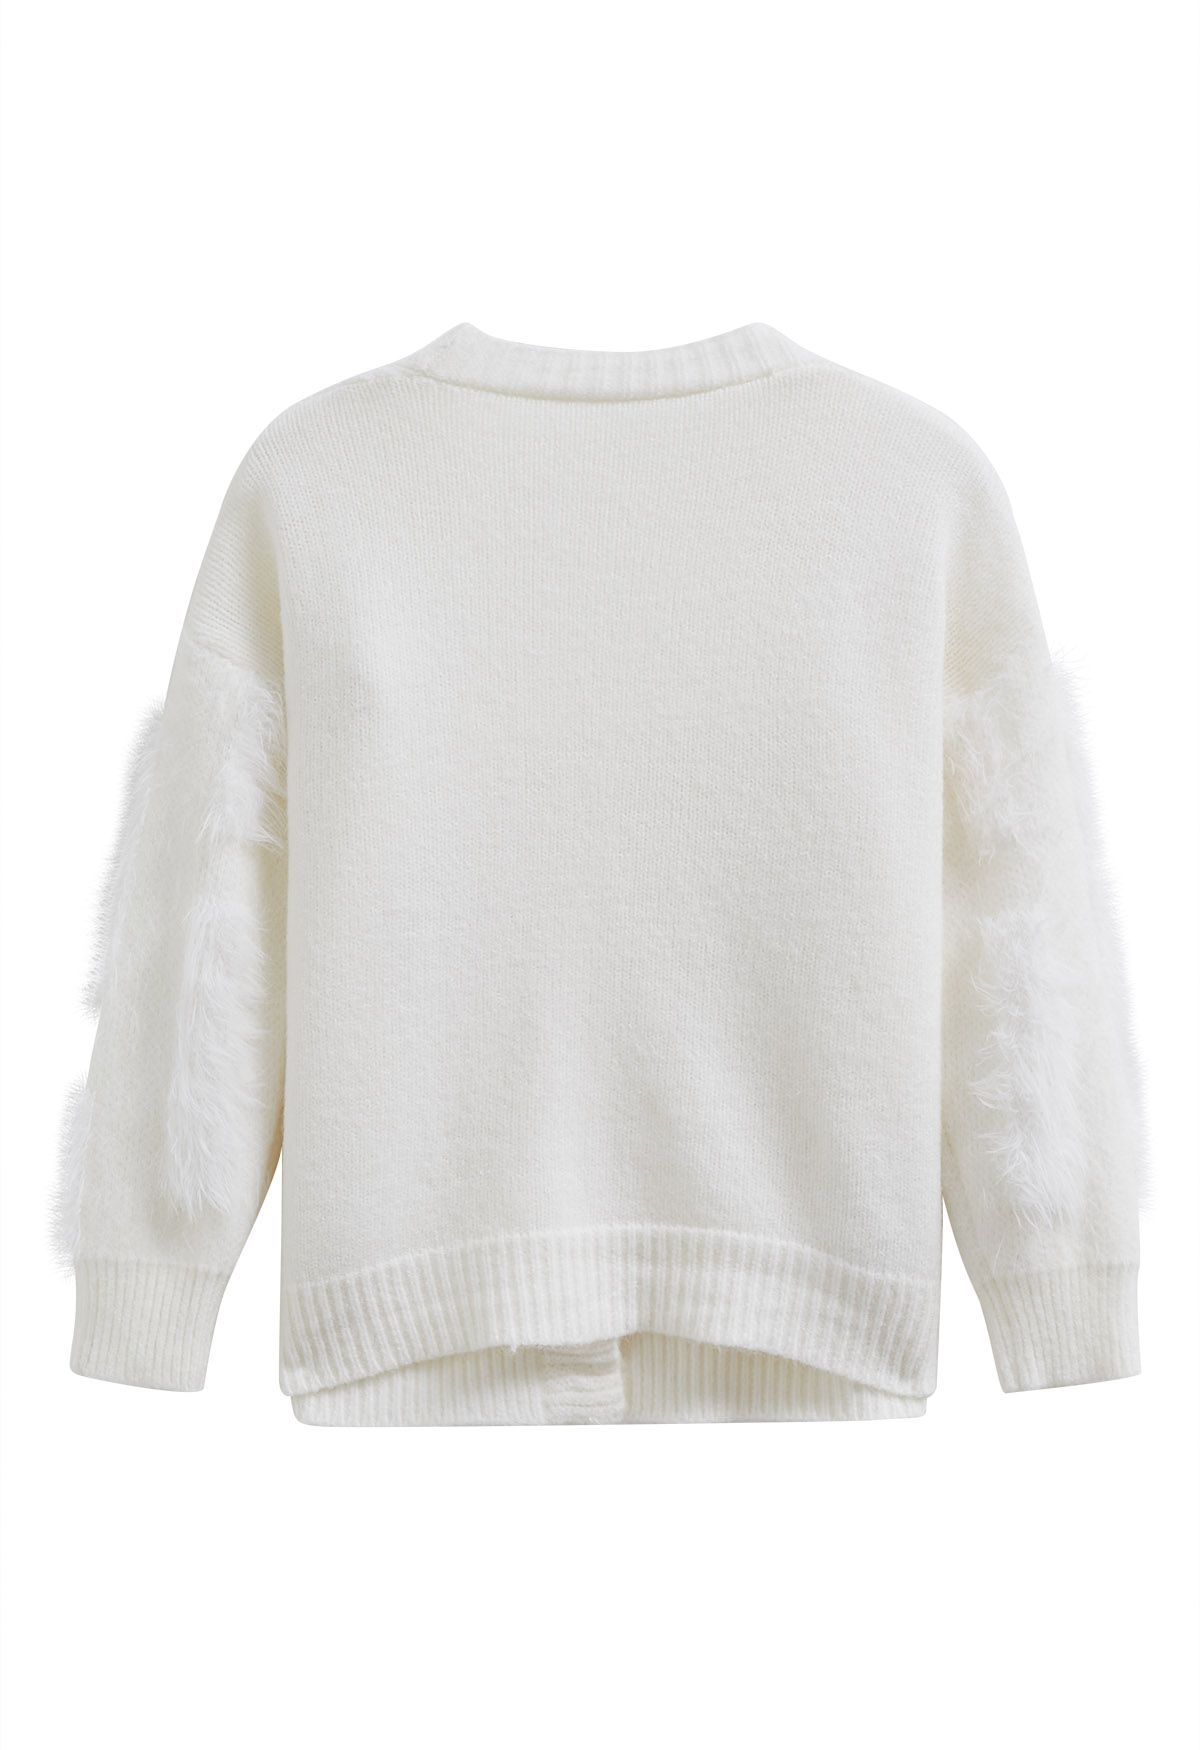 Christmas Elements Fluffy Knit Cardigan in White - Retro, Indie and ...